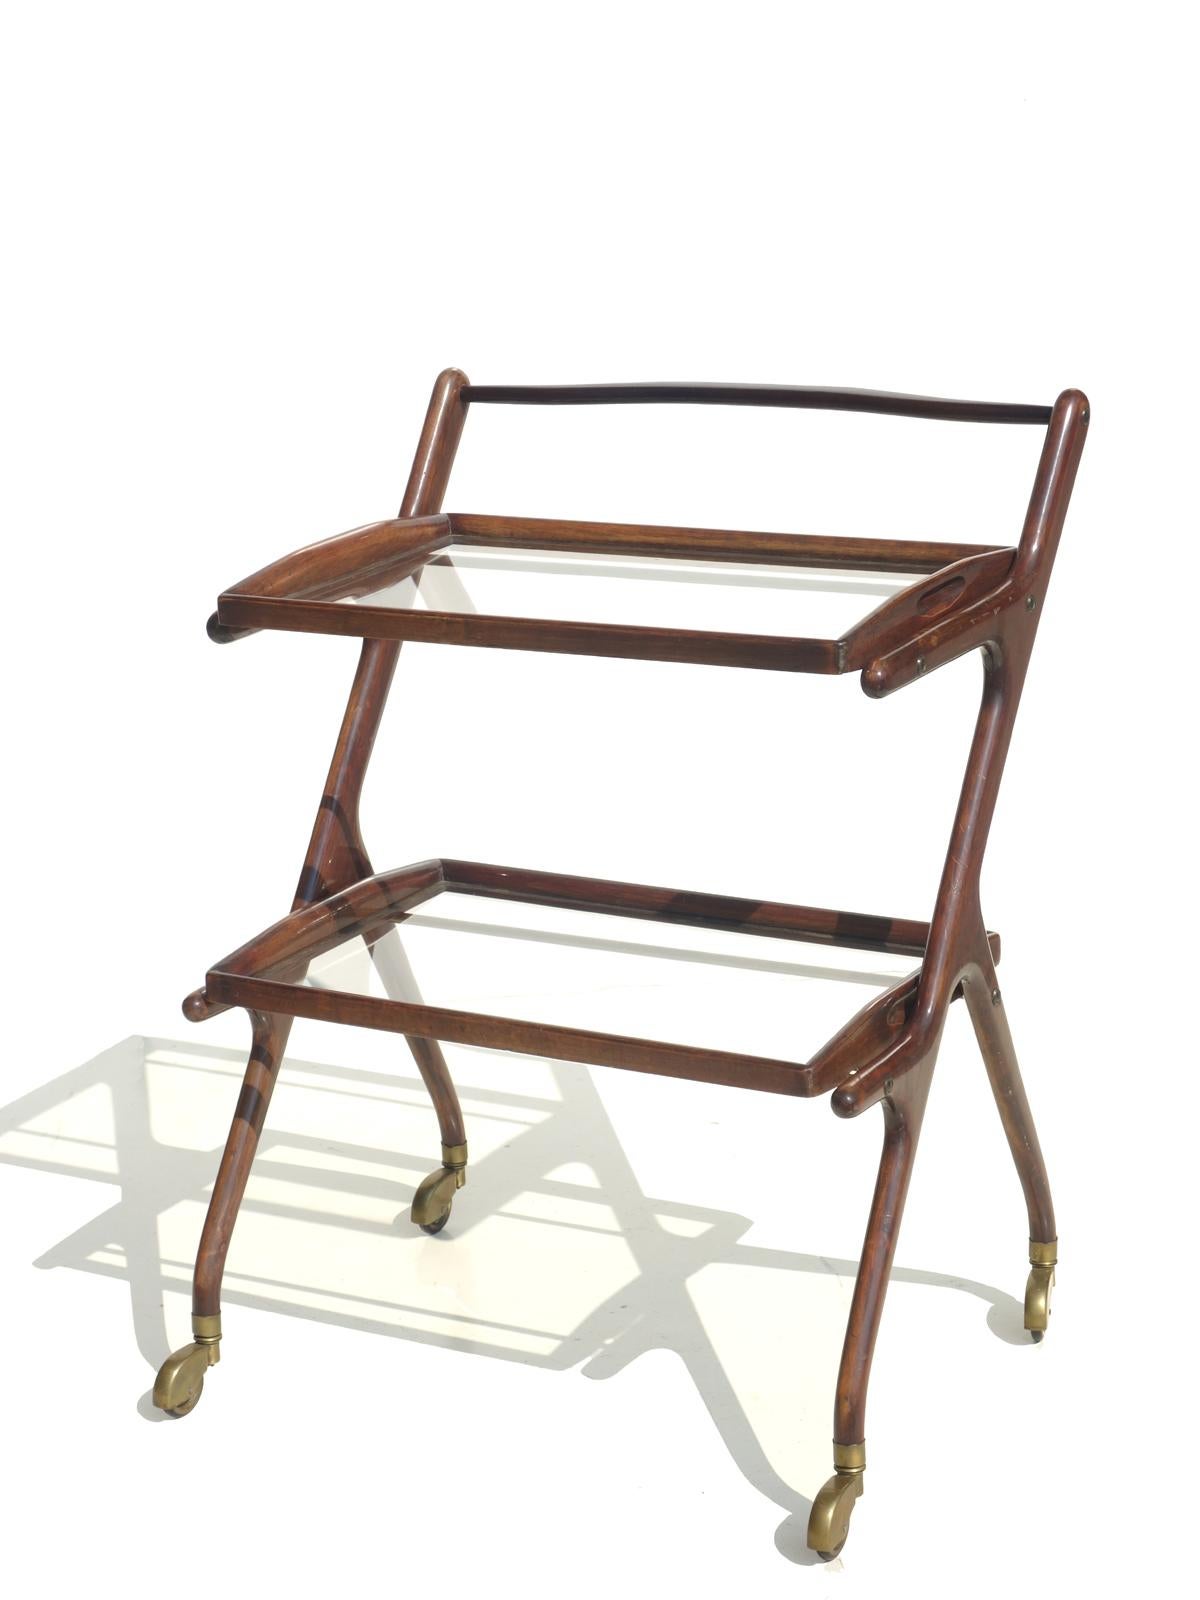 Mid-20th Century 1950s by Cesare Lacca Italian Design Midcentury Bar Cart Trolley For Sale